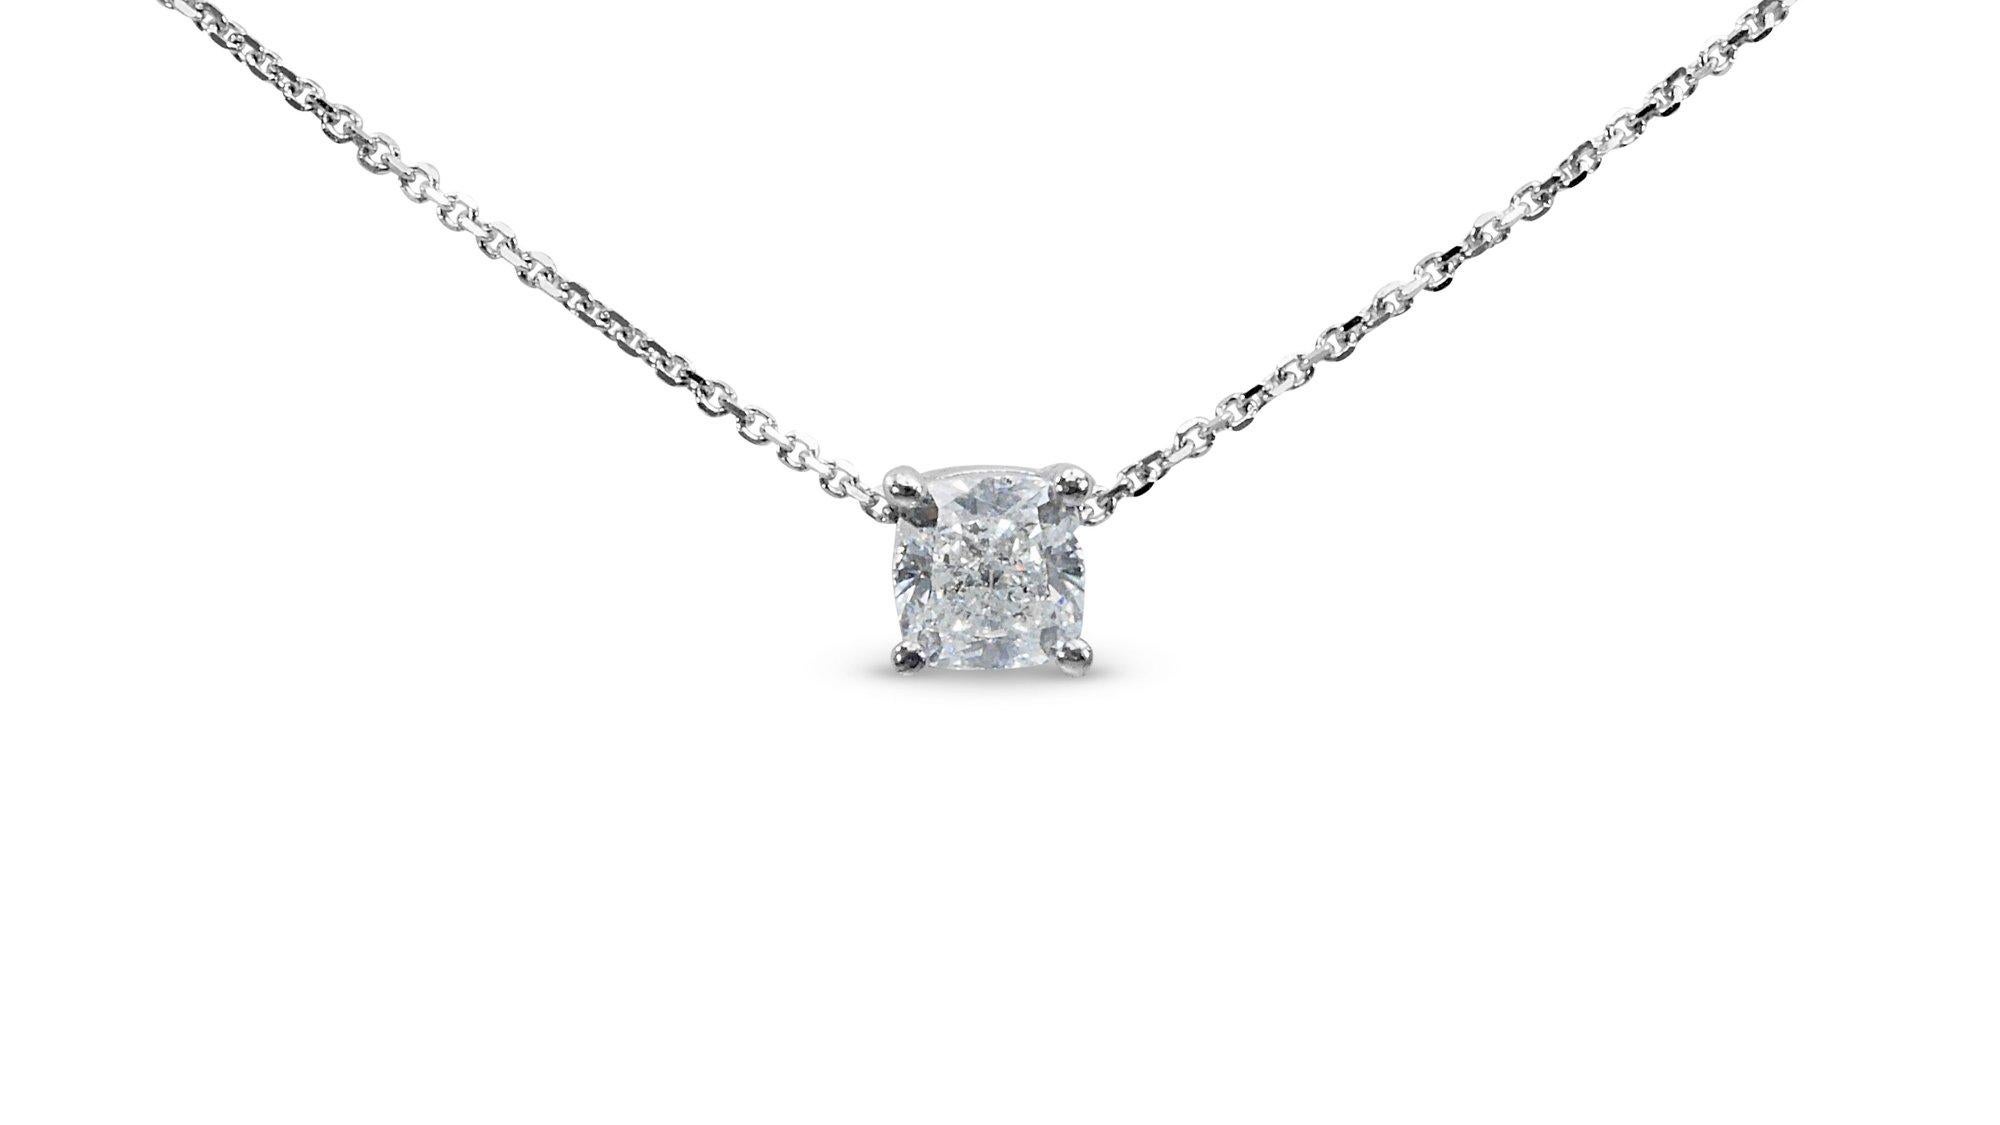 Elegant 1.51ct Cushion Diamond Solitaire Necklace in 18k White Gold - GIA  For Sale 3